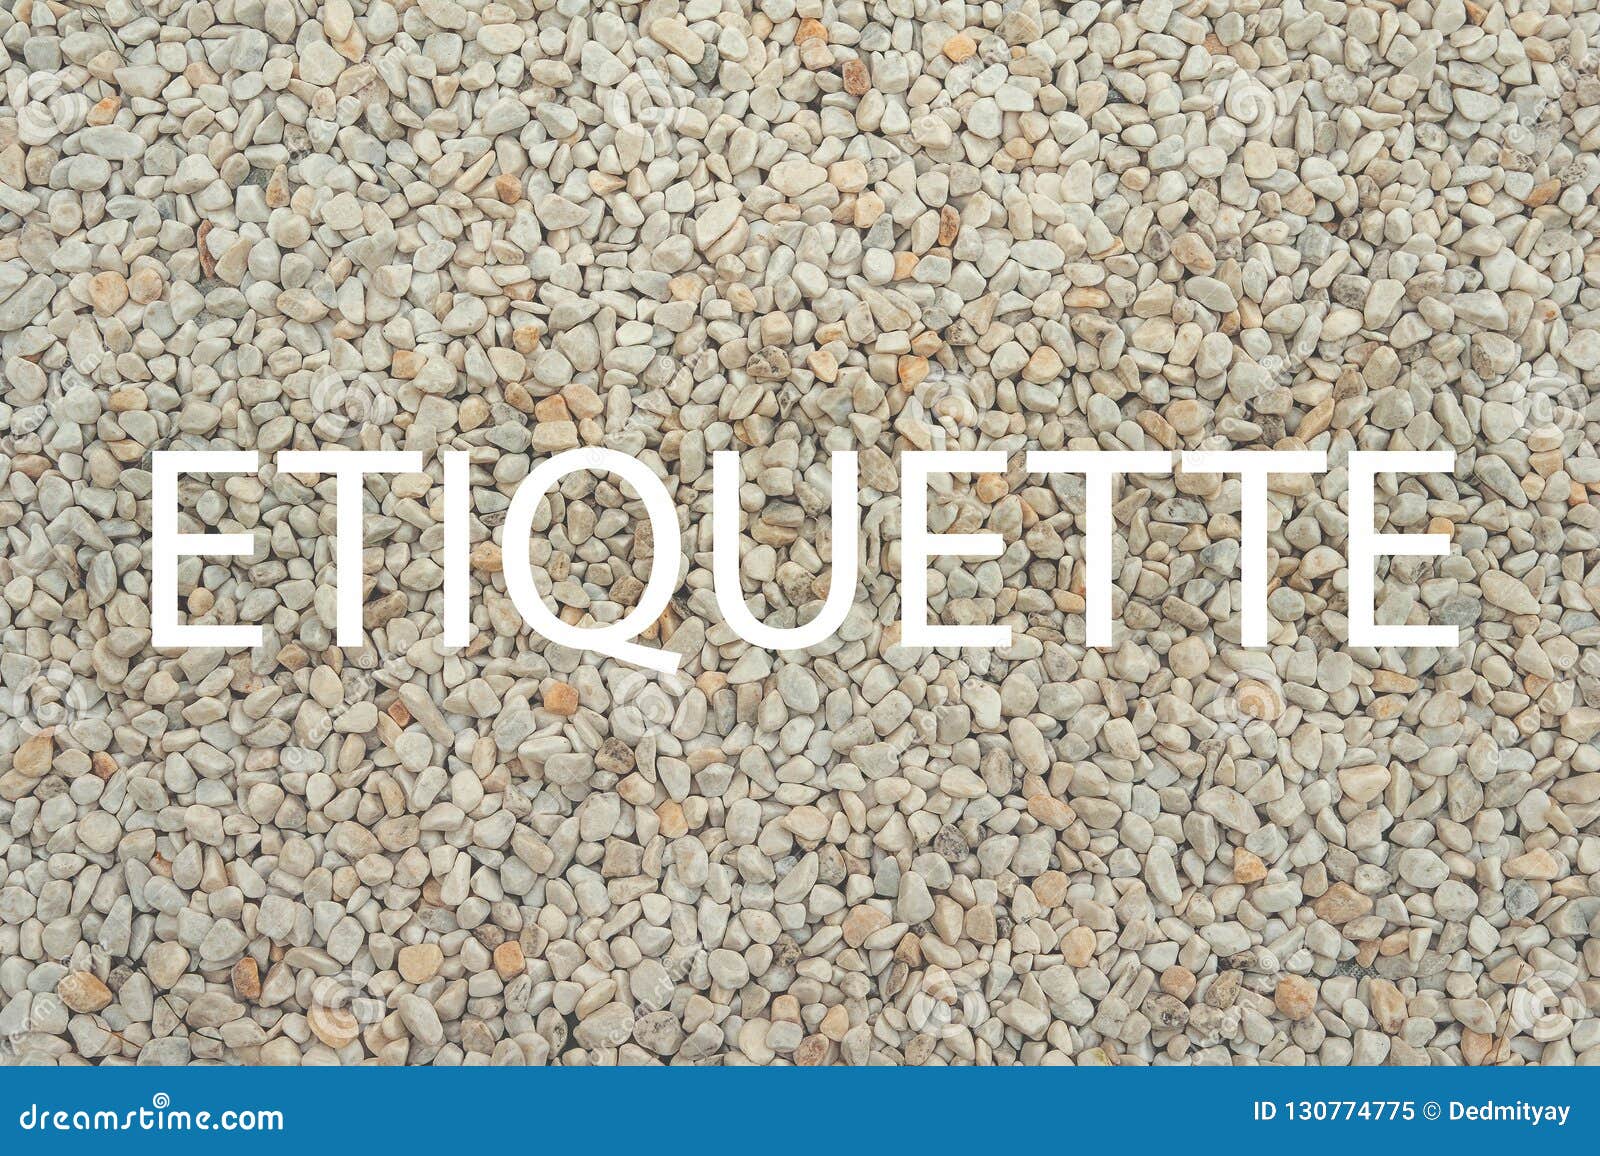 etiquette - word on stone background as blank for 